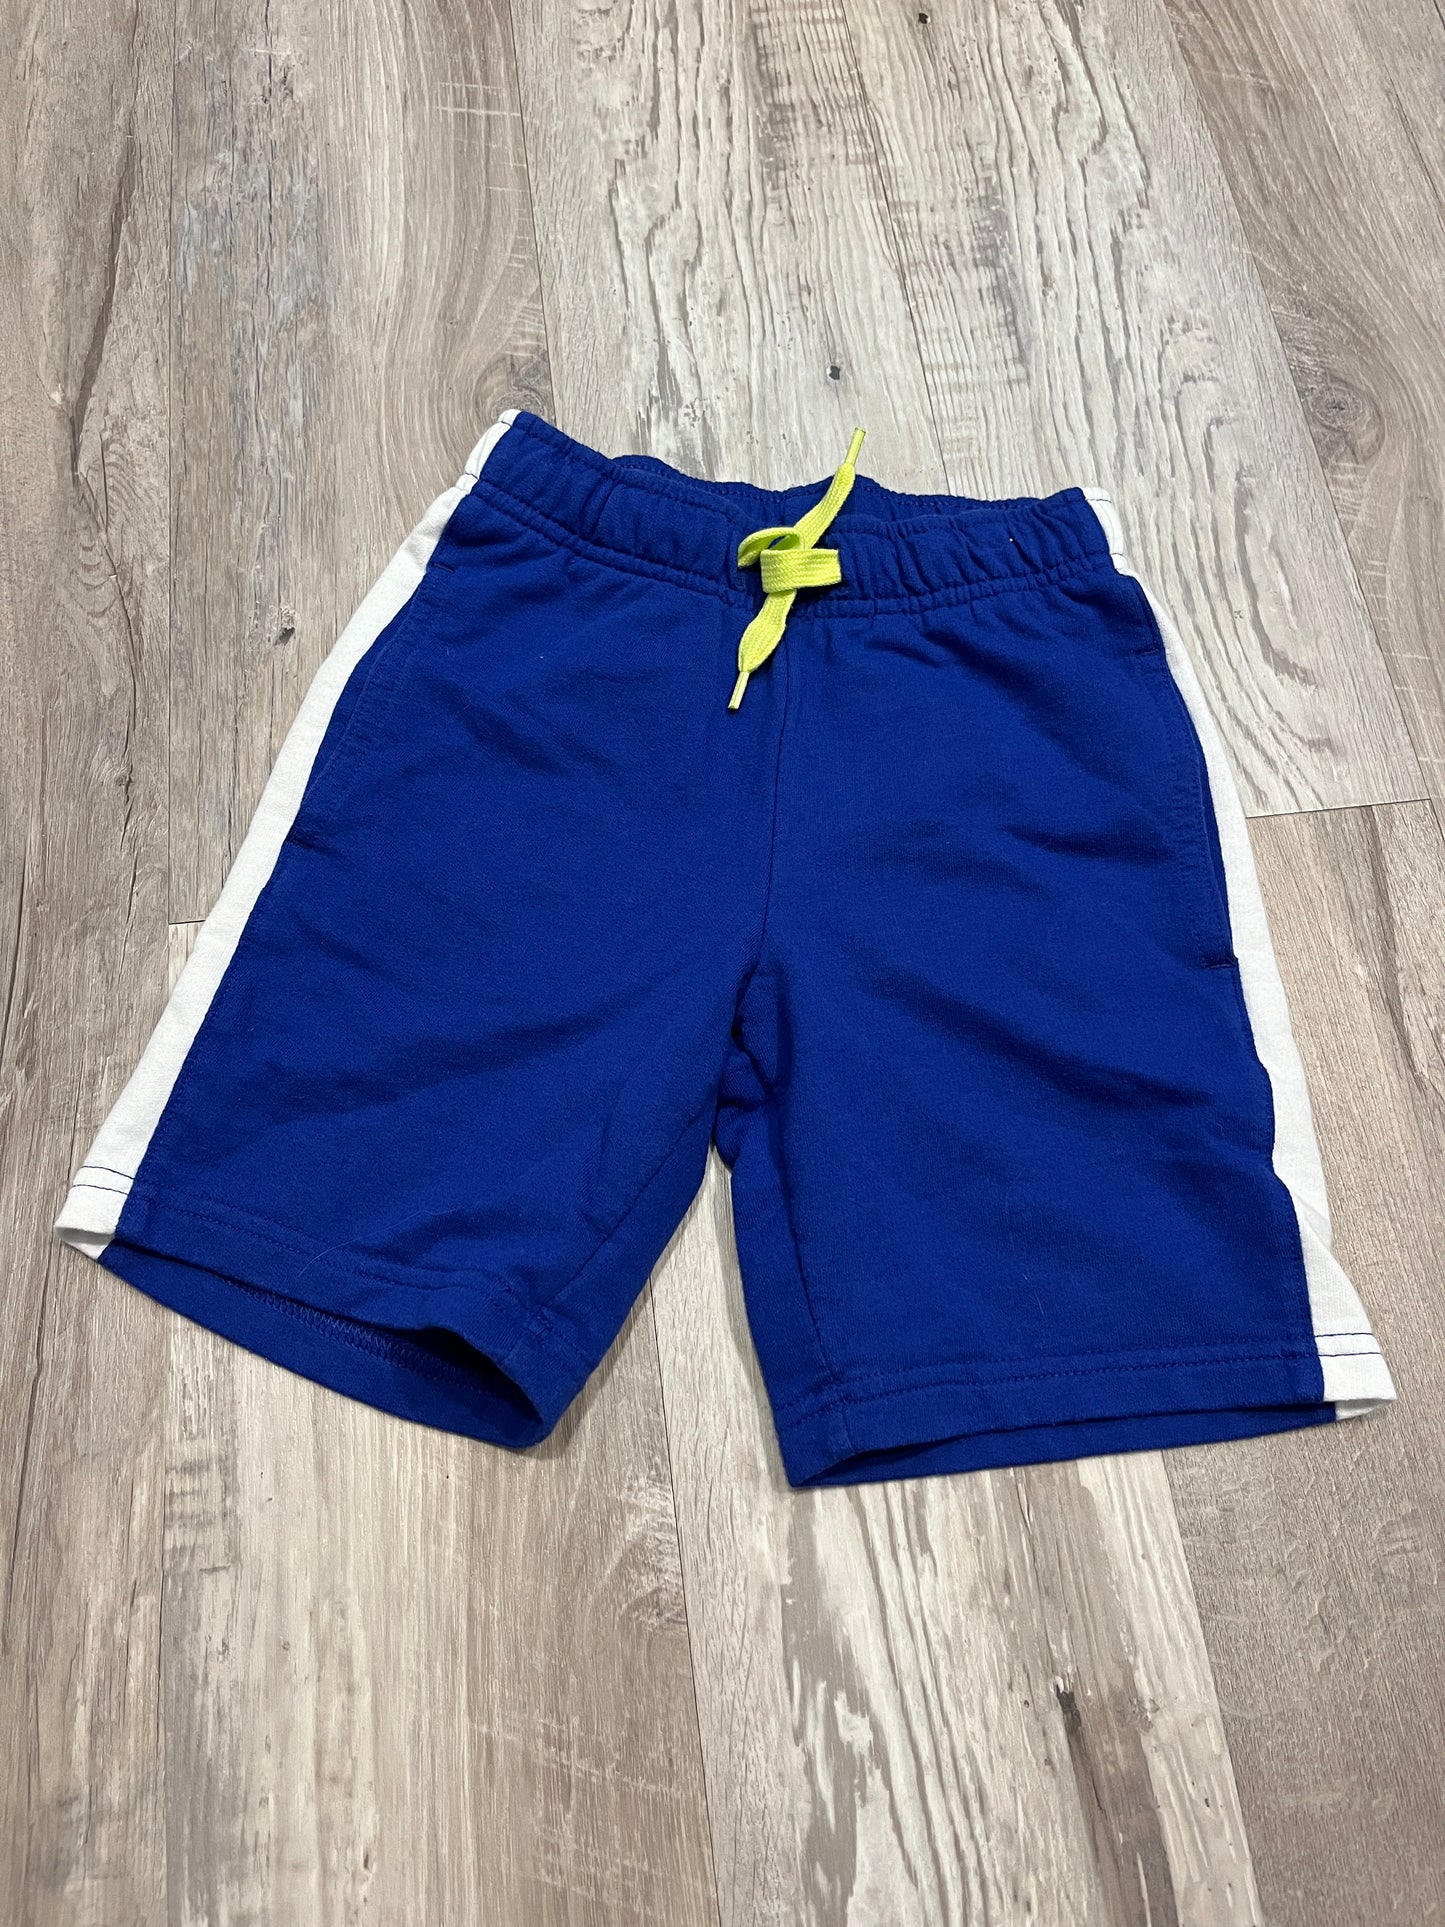 Boys Cat and Jack Blue and White Knit Shorts Size 4/5